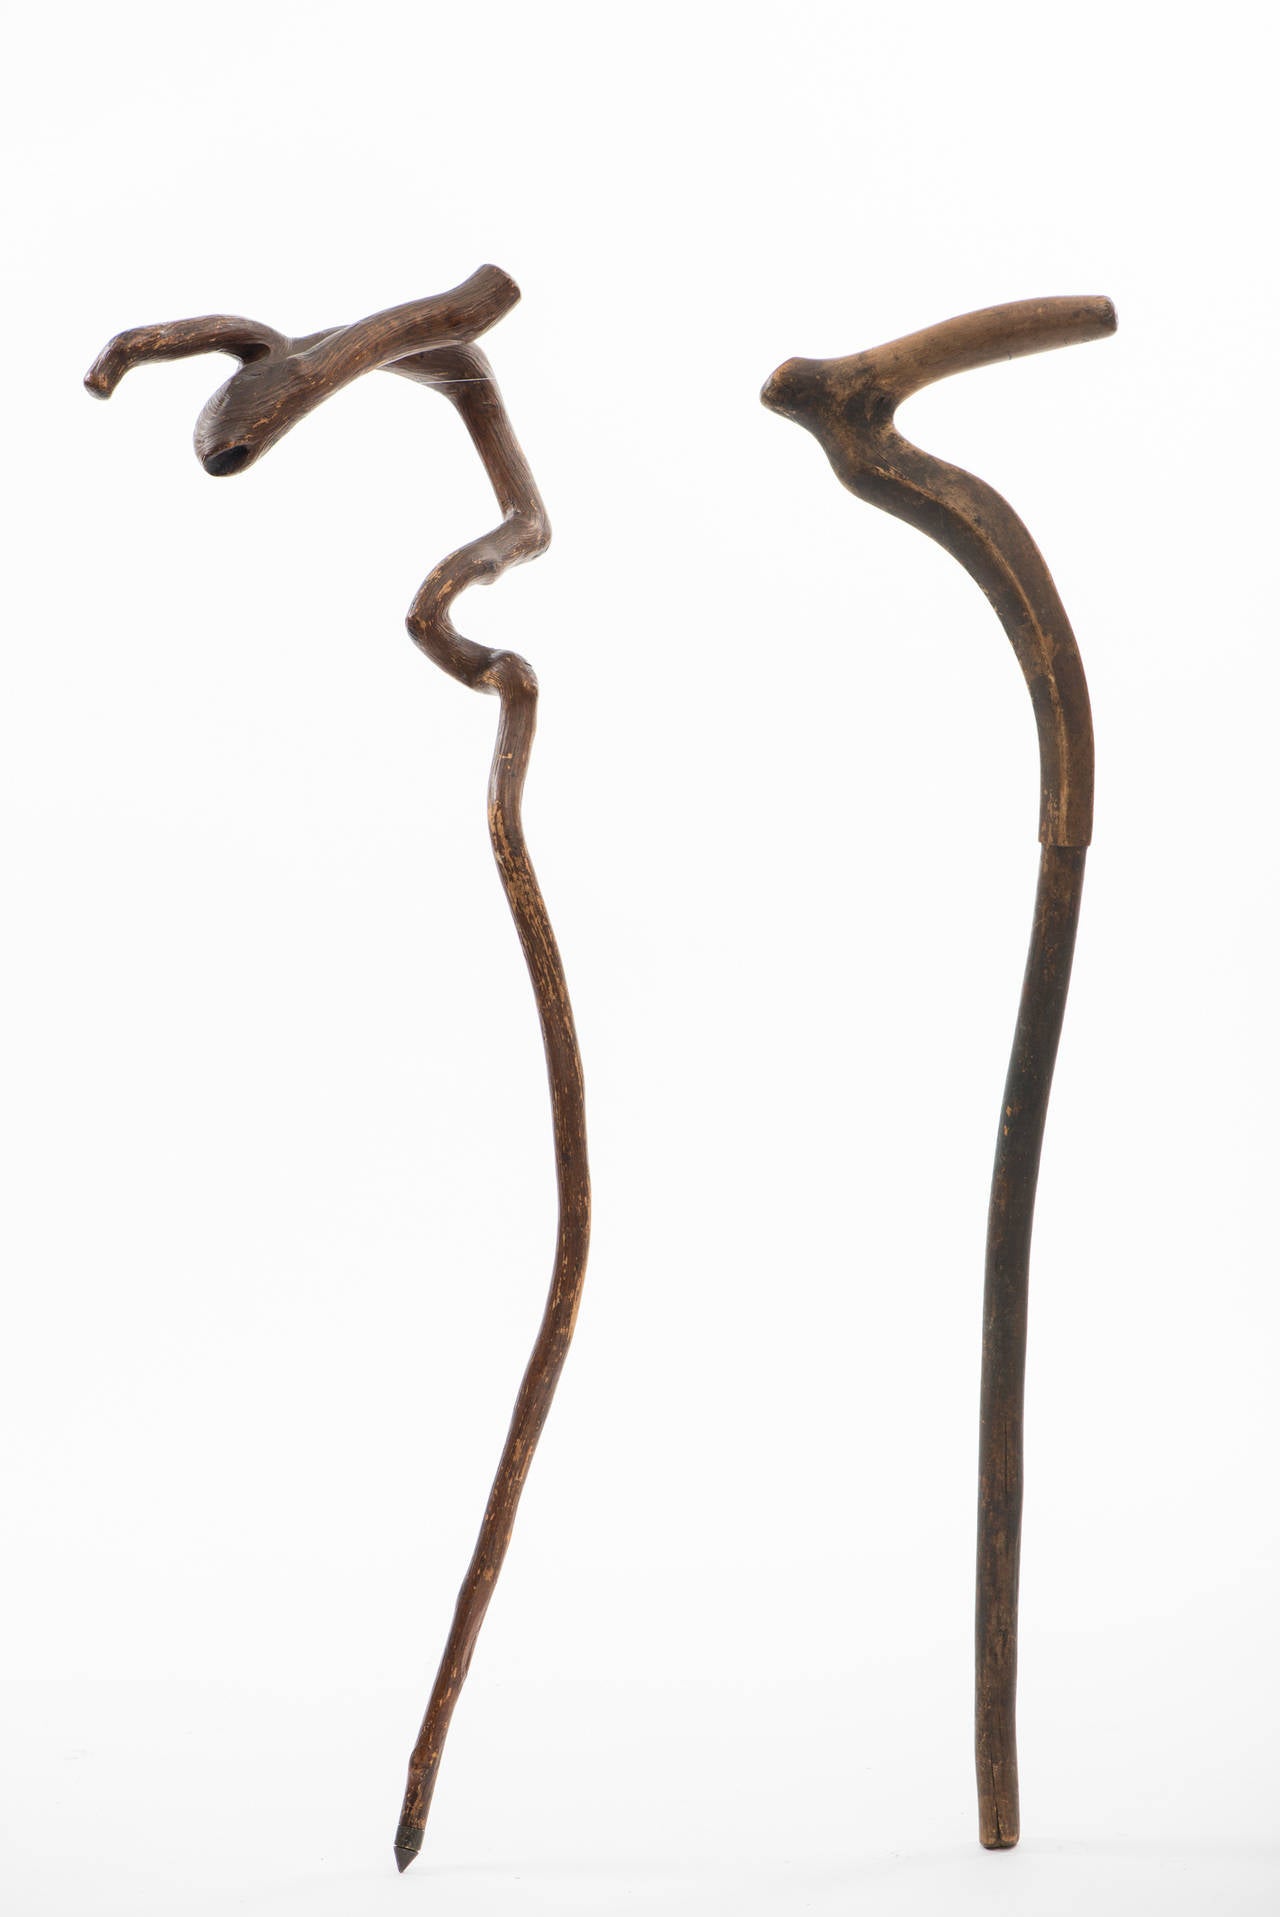 Carved Rustic Cane Group and Early Stand, 19th Century